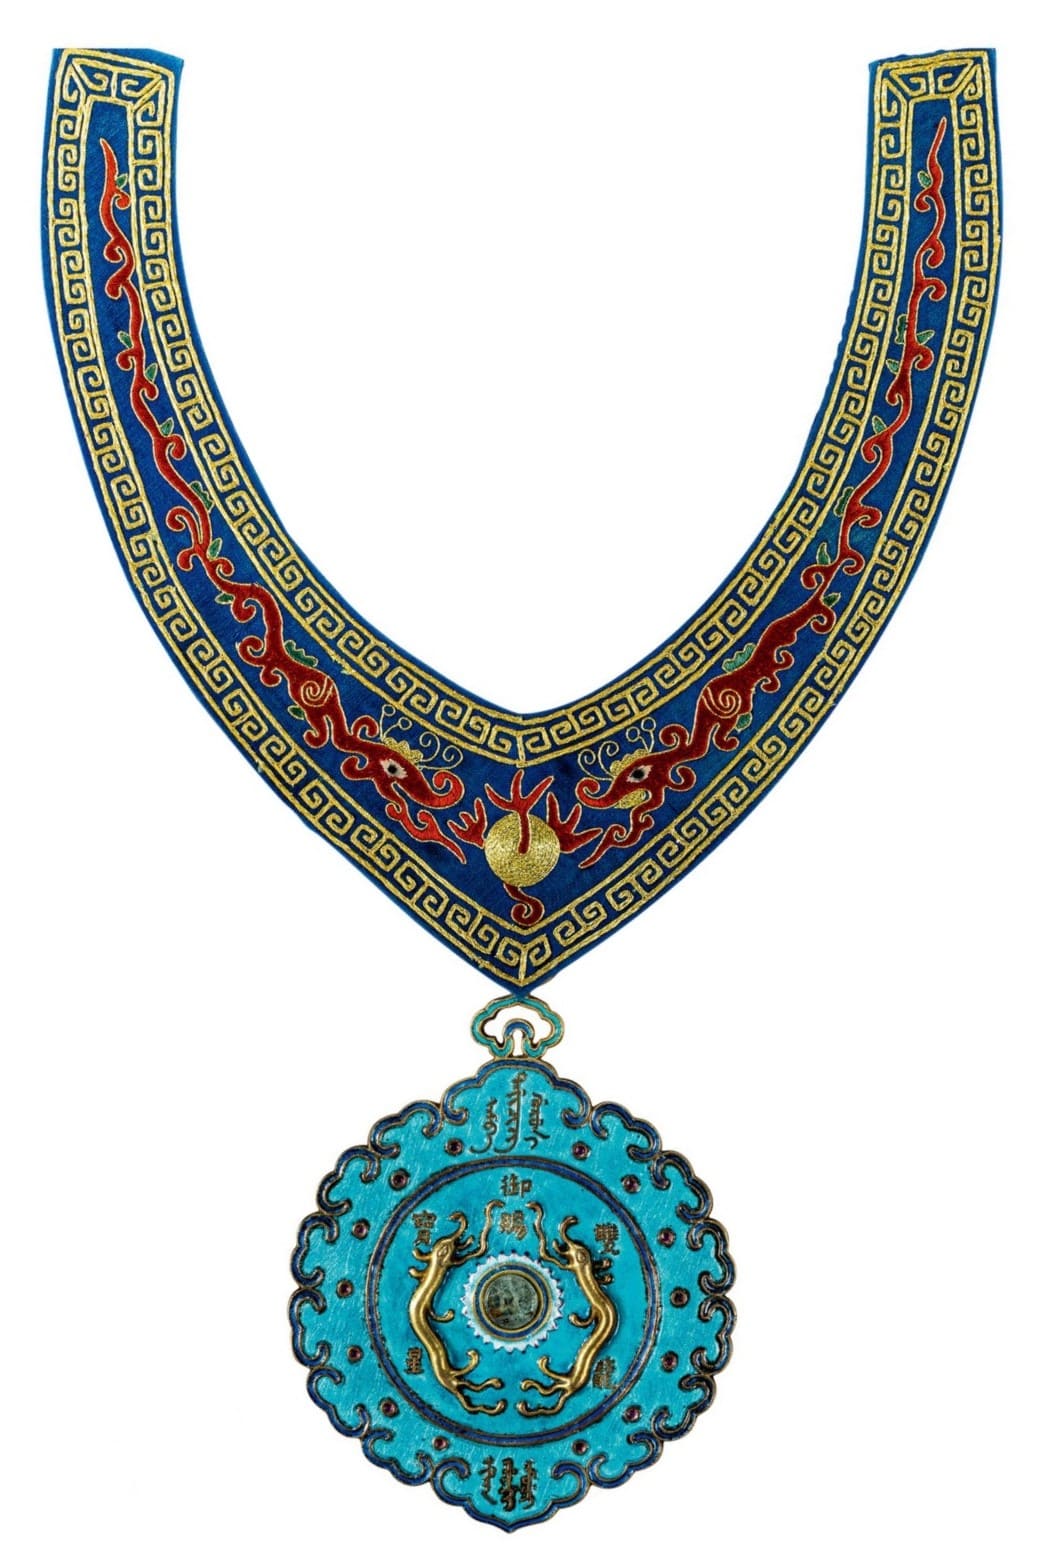 Order of the Double Dragon awarded in  1895 to William Cartwright.jpg